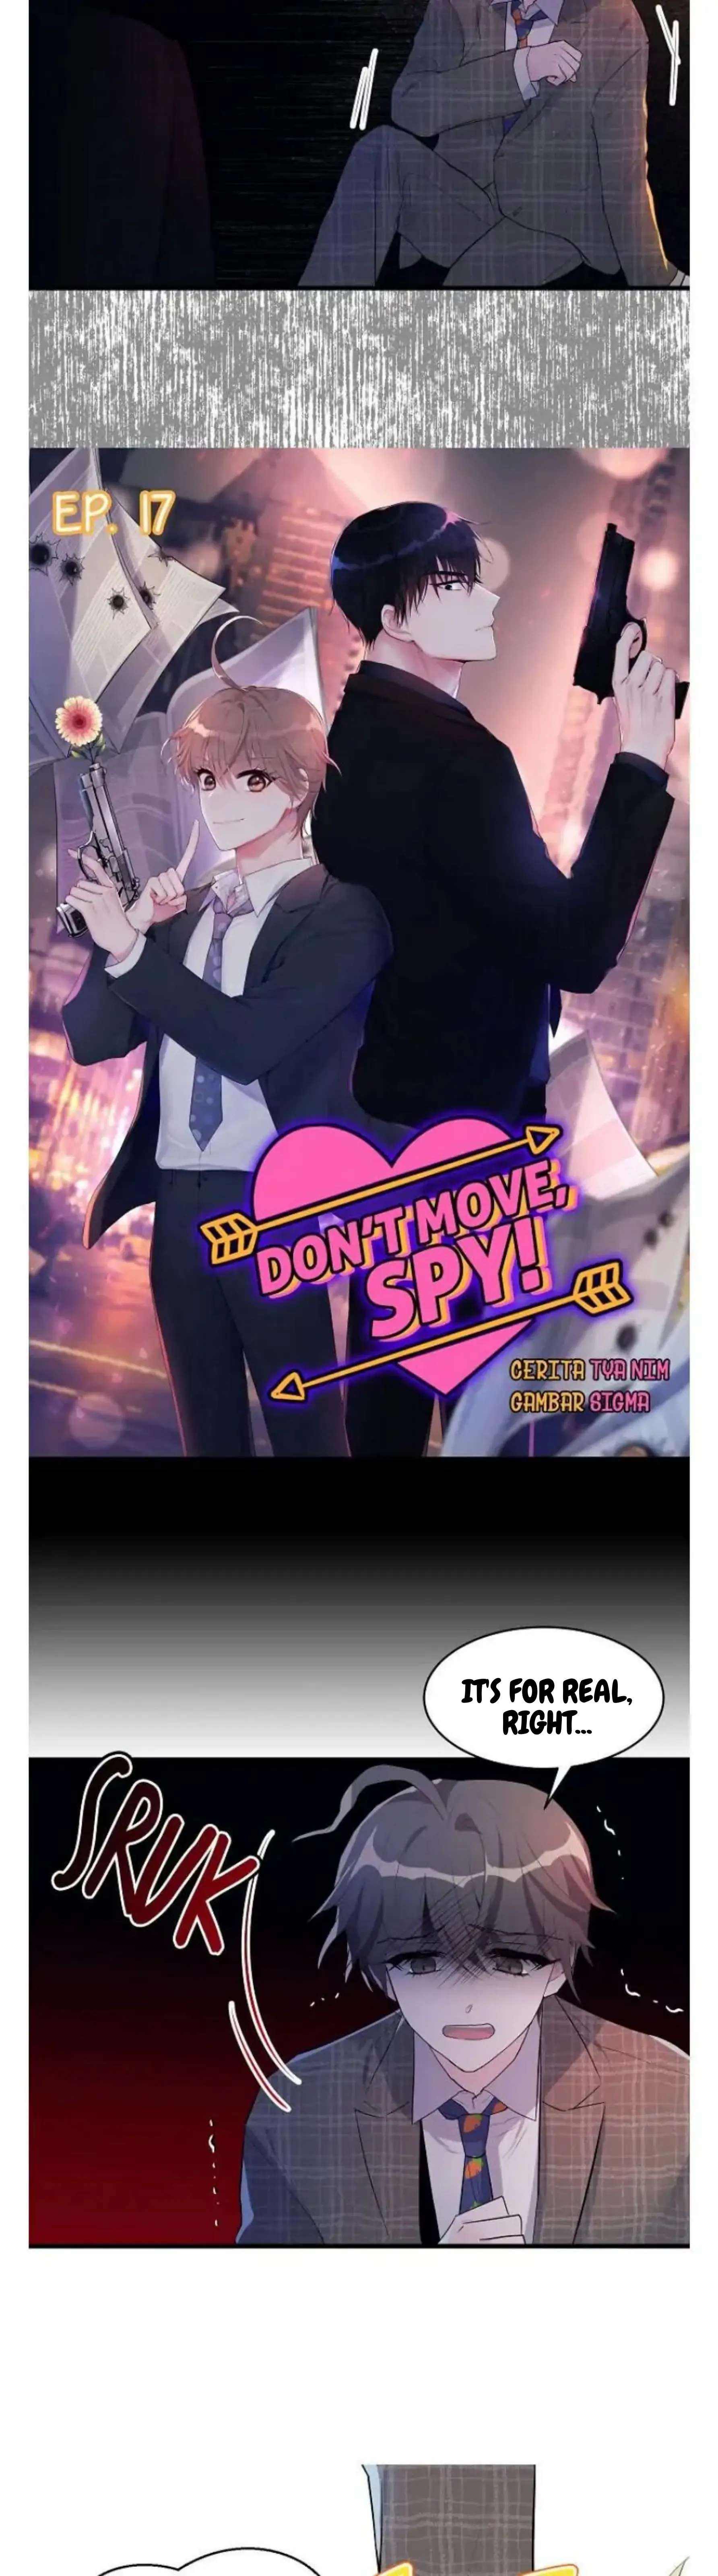 Don’T Move, Spy! - Page 3